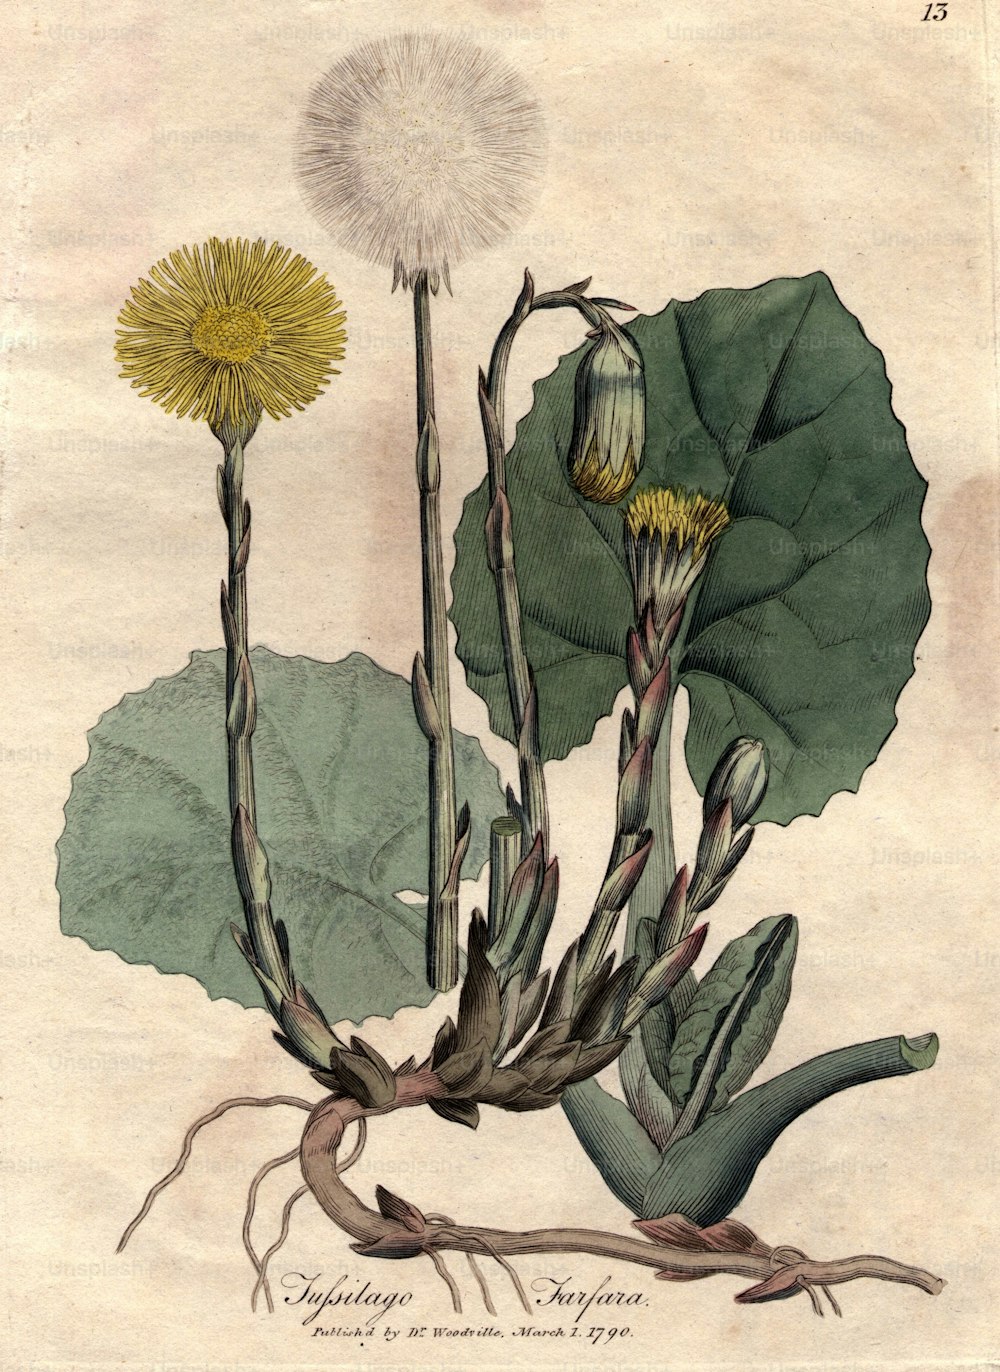 1st March 1790:  Tufsilago farfara, or coltsfoot.  Original Publication: From Woodville's Medical Botany, illustrated by James Sowerby - pub 1790 -1795  (Photo by Hulton Archive/Getty Images)